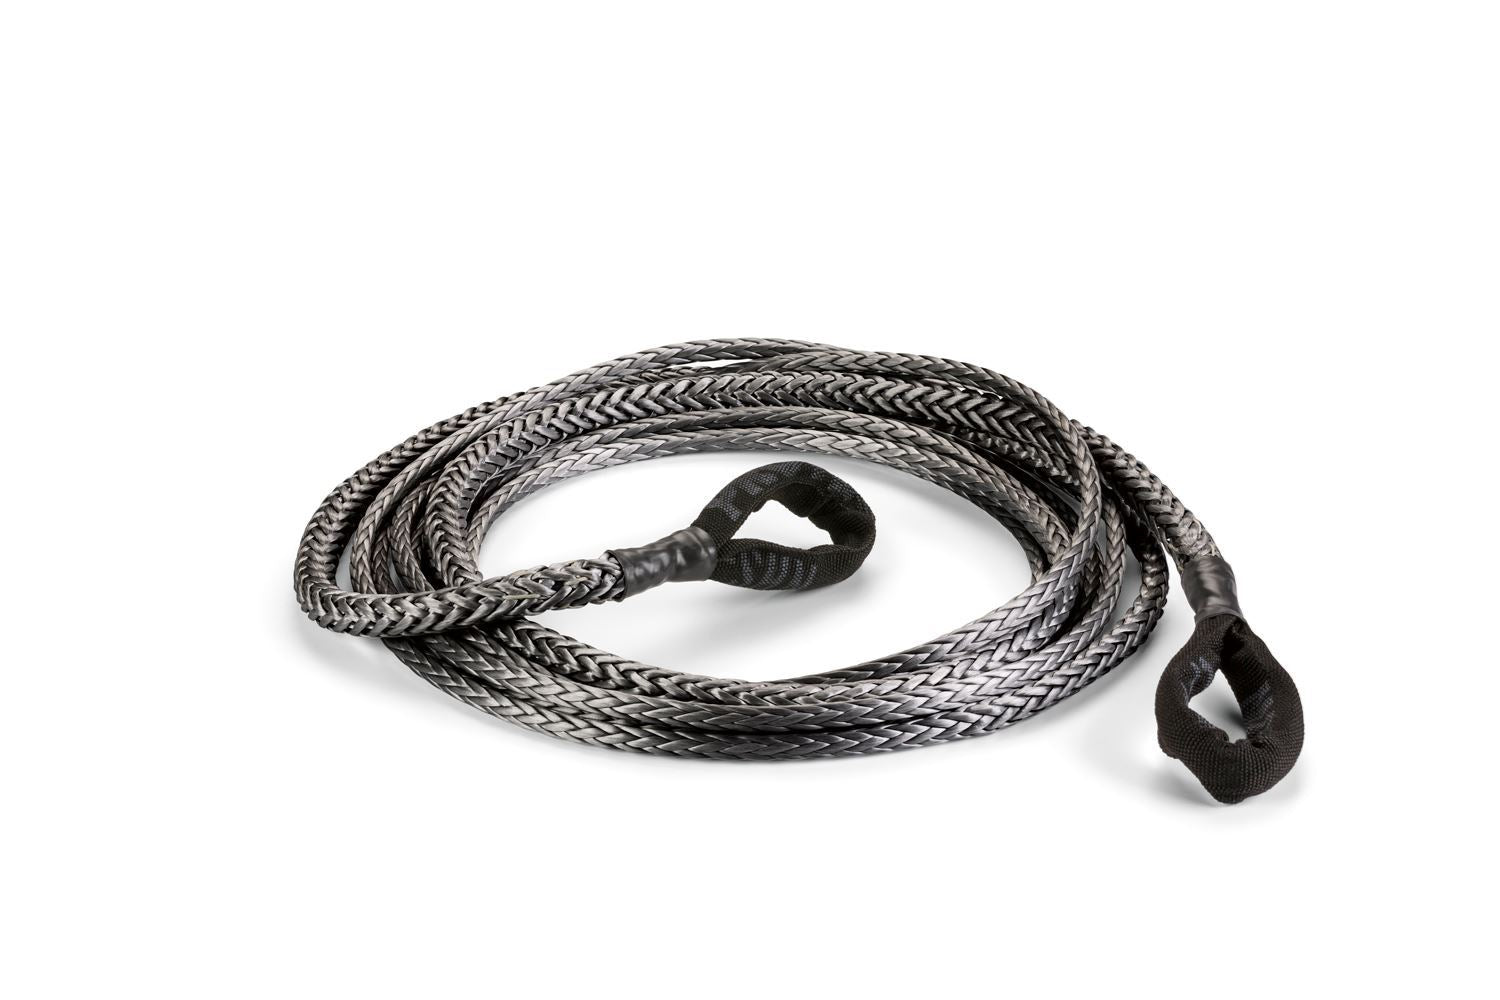 WARN Spydura Pro Synthetic Rope Extension, 50ft x 3/8in